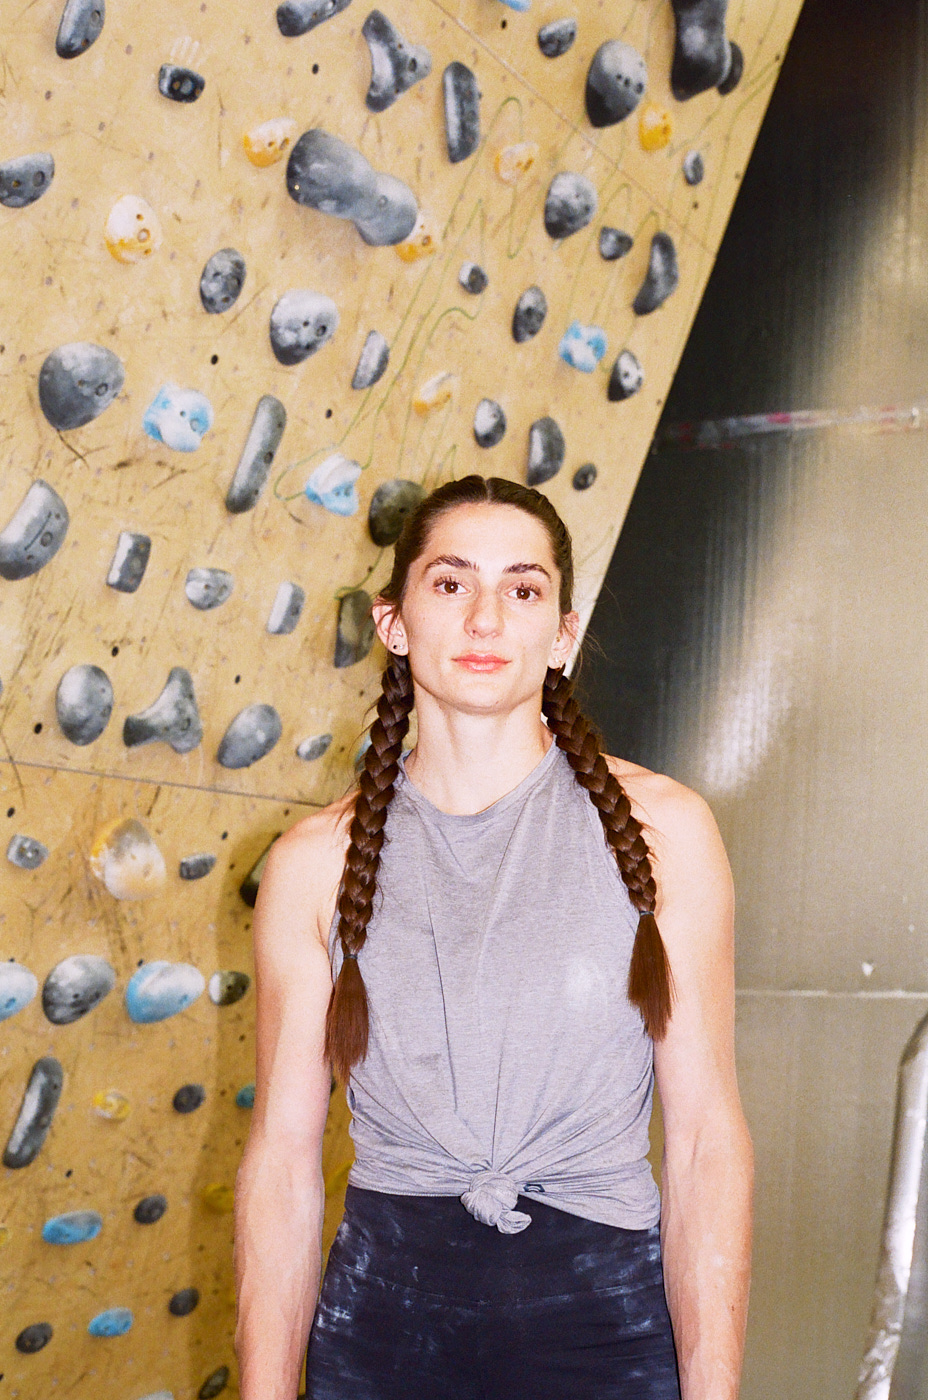 Kyra Condie is the first female  United States Sport climbing Olympic athlete. Documenting Kyra at the US Climbing National Training Center in Utah and at her childhood home in Minneapolis at The A.